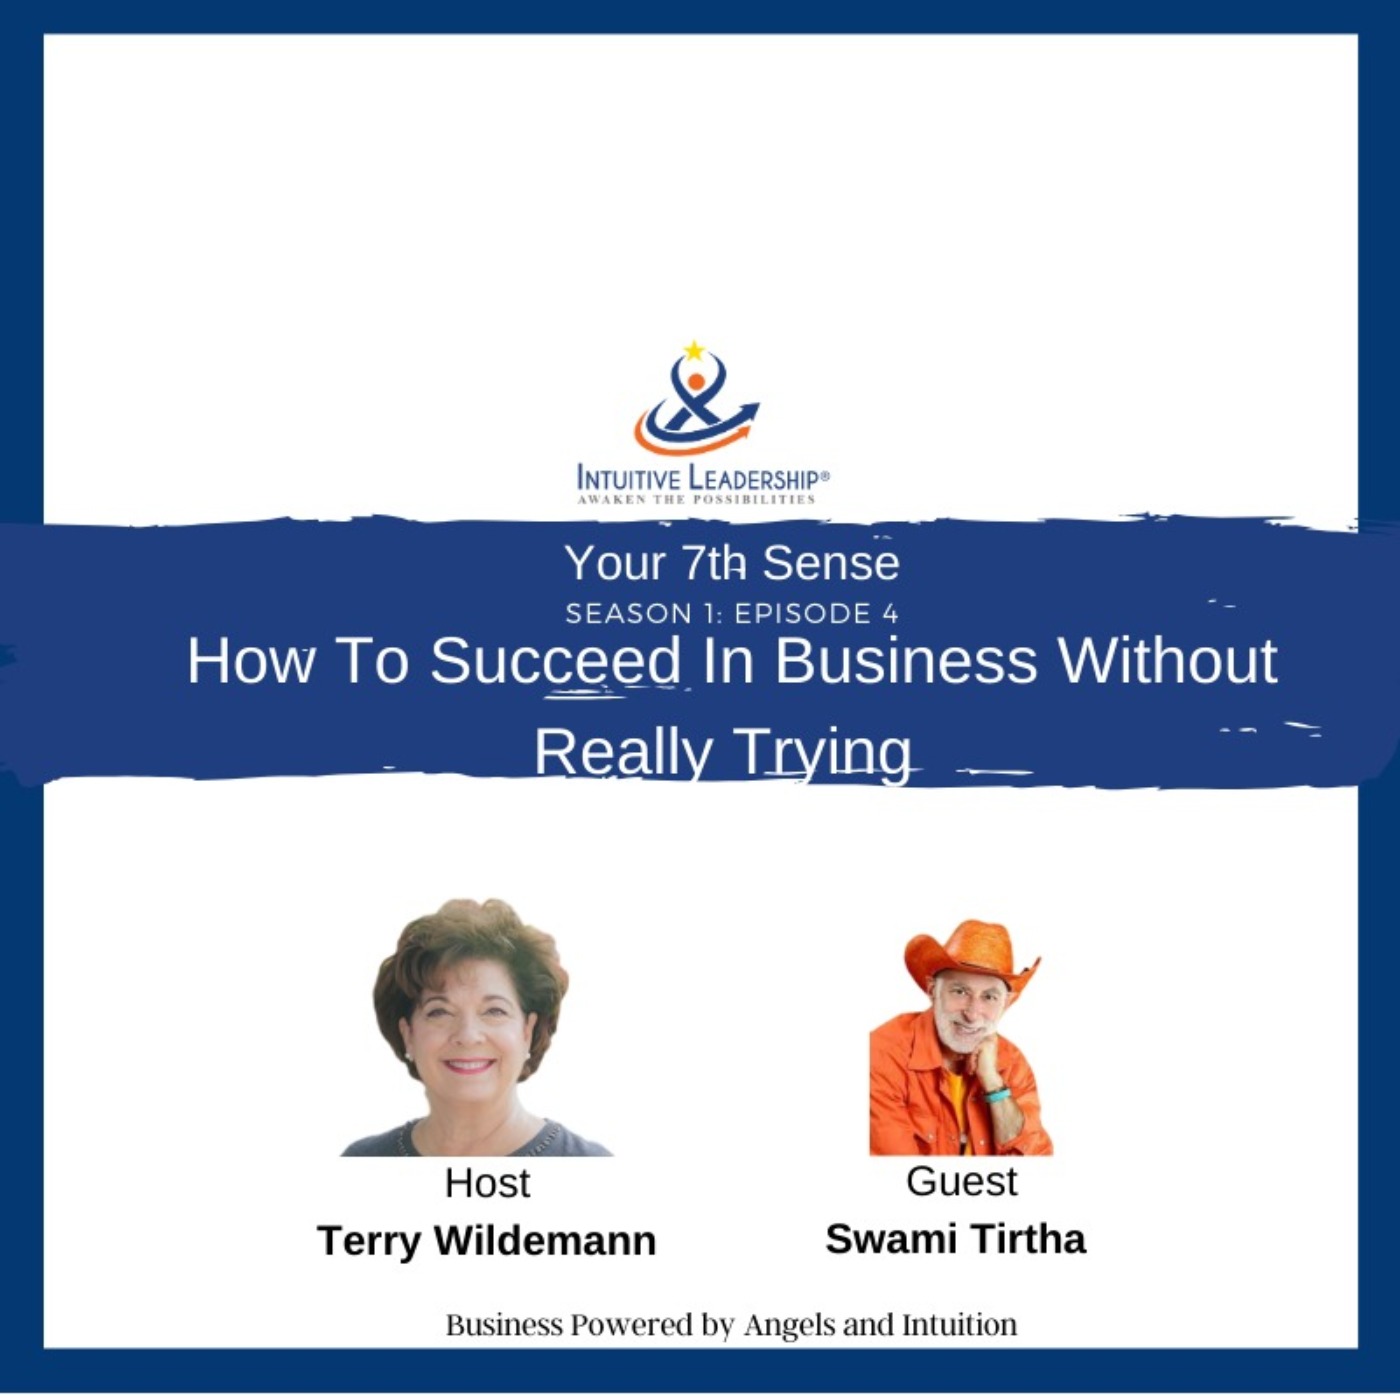 Your 7th Sense: How To Succeed In Business Without Really Trying